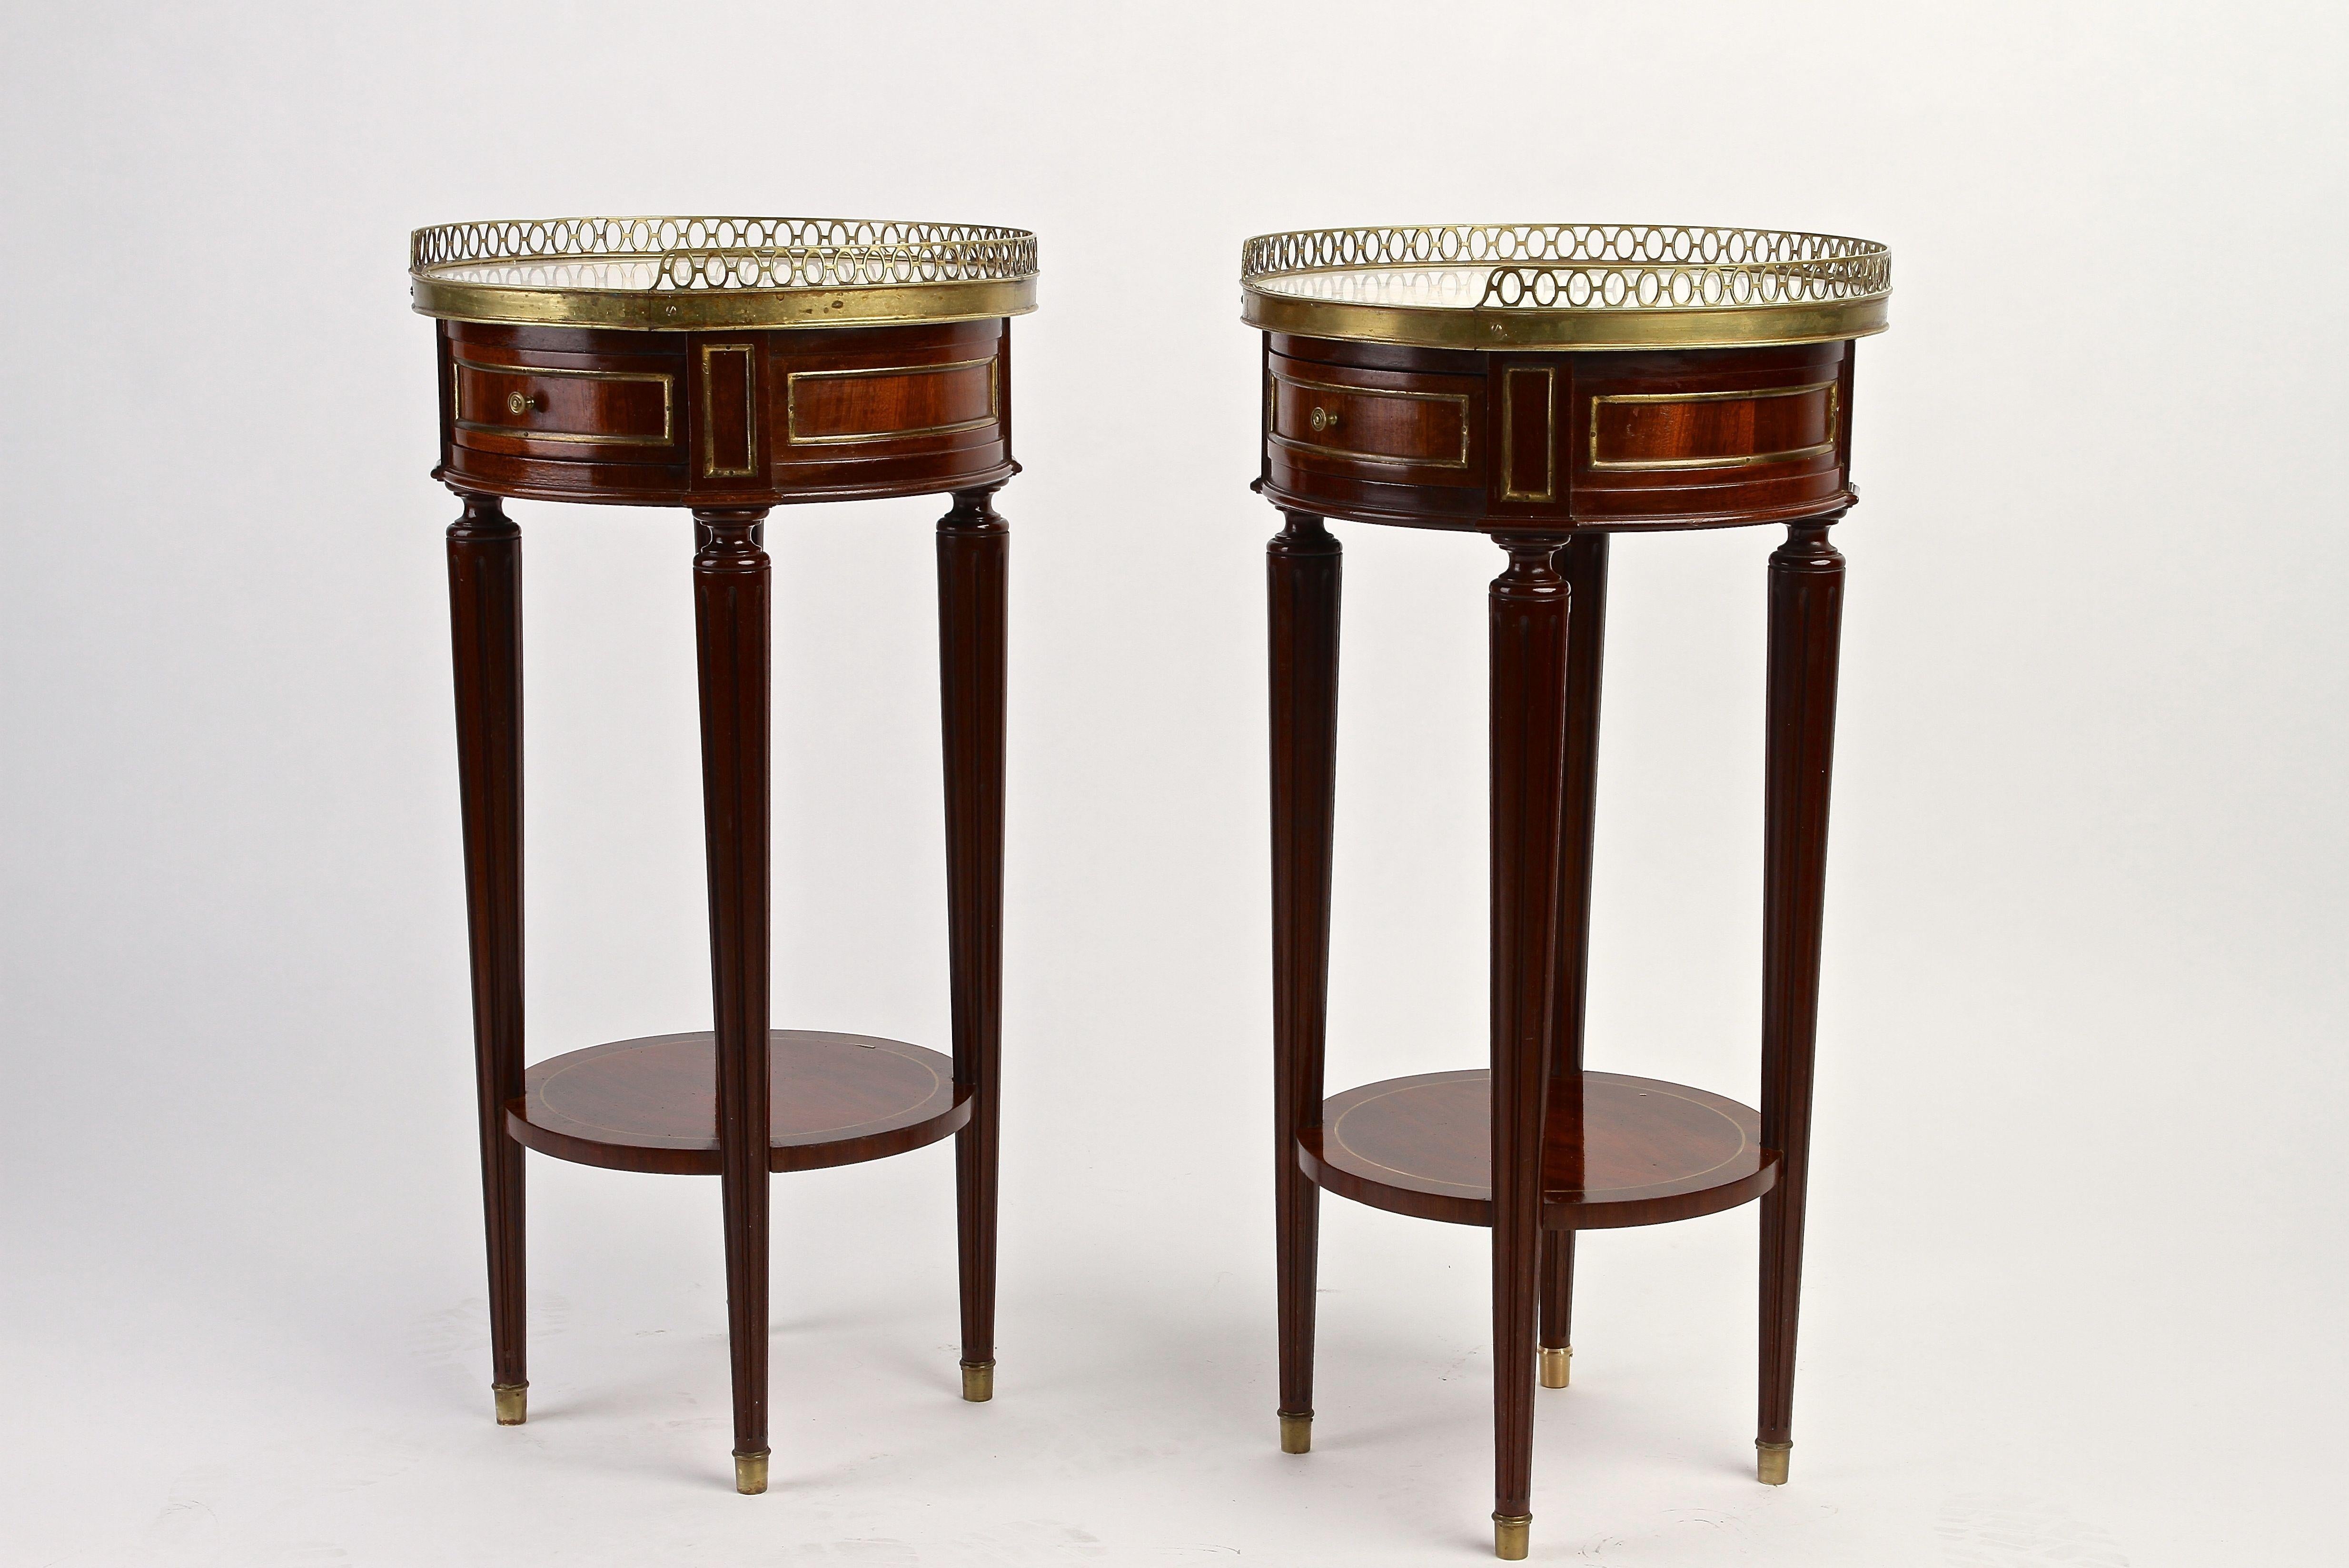 Brass Pair of 19th Century French Mahogany Gueridon/ Side Tables, France, circa 1870